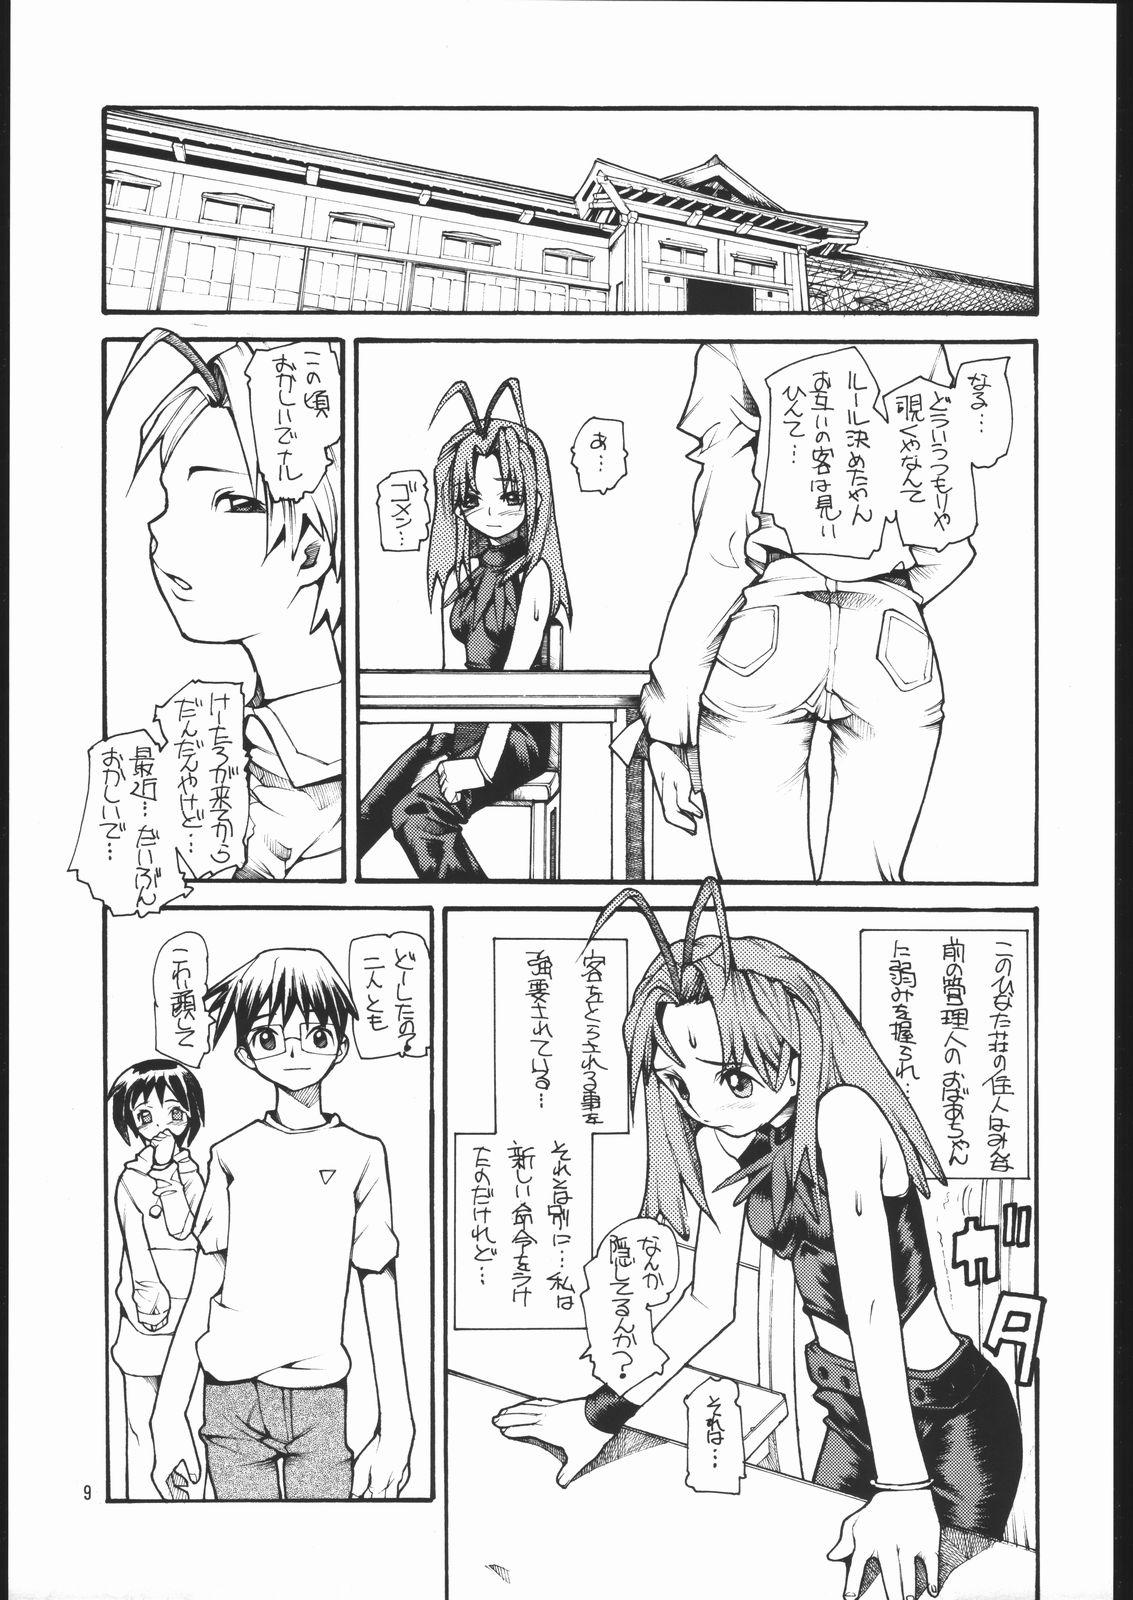 Licking HR6 | Hyper Resturant 6 - Love hina Step Mom - Page 8